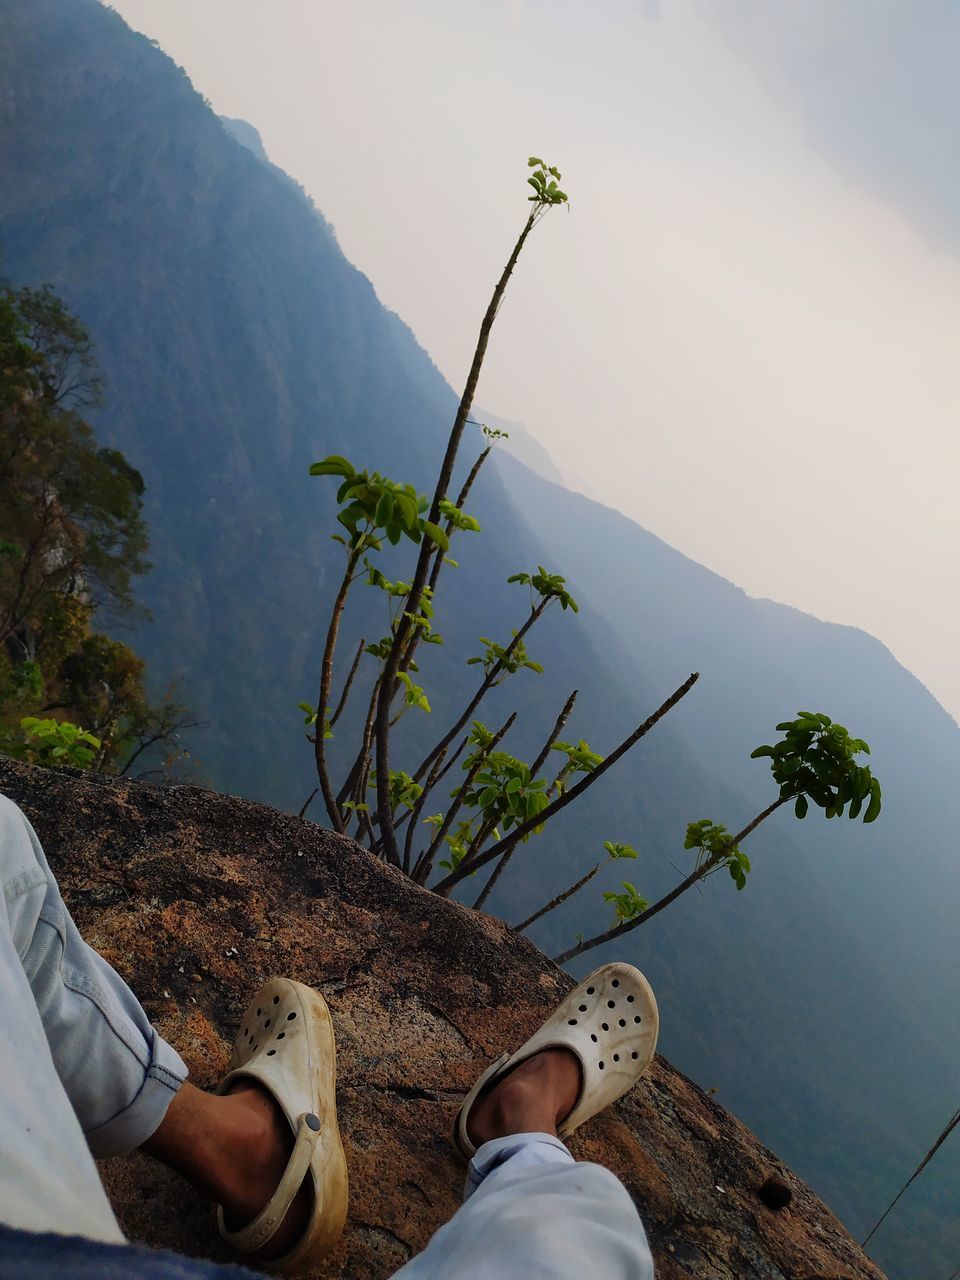 one person, nature, human leg, plant, low section, leisure activity, water, mountain, shoe, personal perspective, beauty in nature, adult, lifestyles, relaxation, men, scenics - nature, limb, sky, day, human limb, tree, outdoors, environment, land, lake, human foot, tranquility, holiday, vacation, trip, mountain range, travel, sitting, footwear, landscape, casual clothing, activity, high angle view, travel destinations, tranquil scene, flower